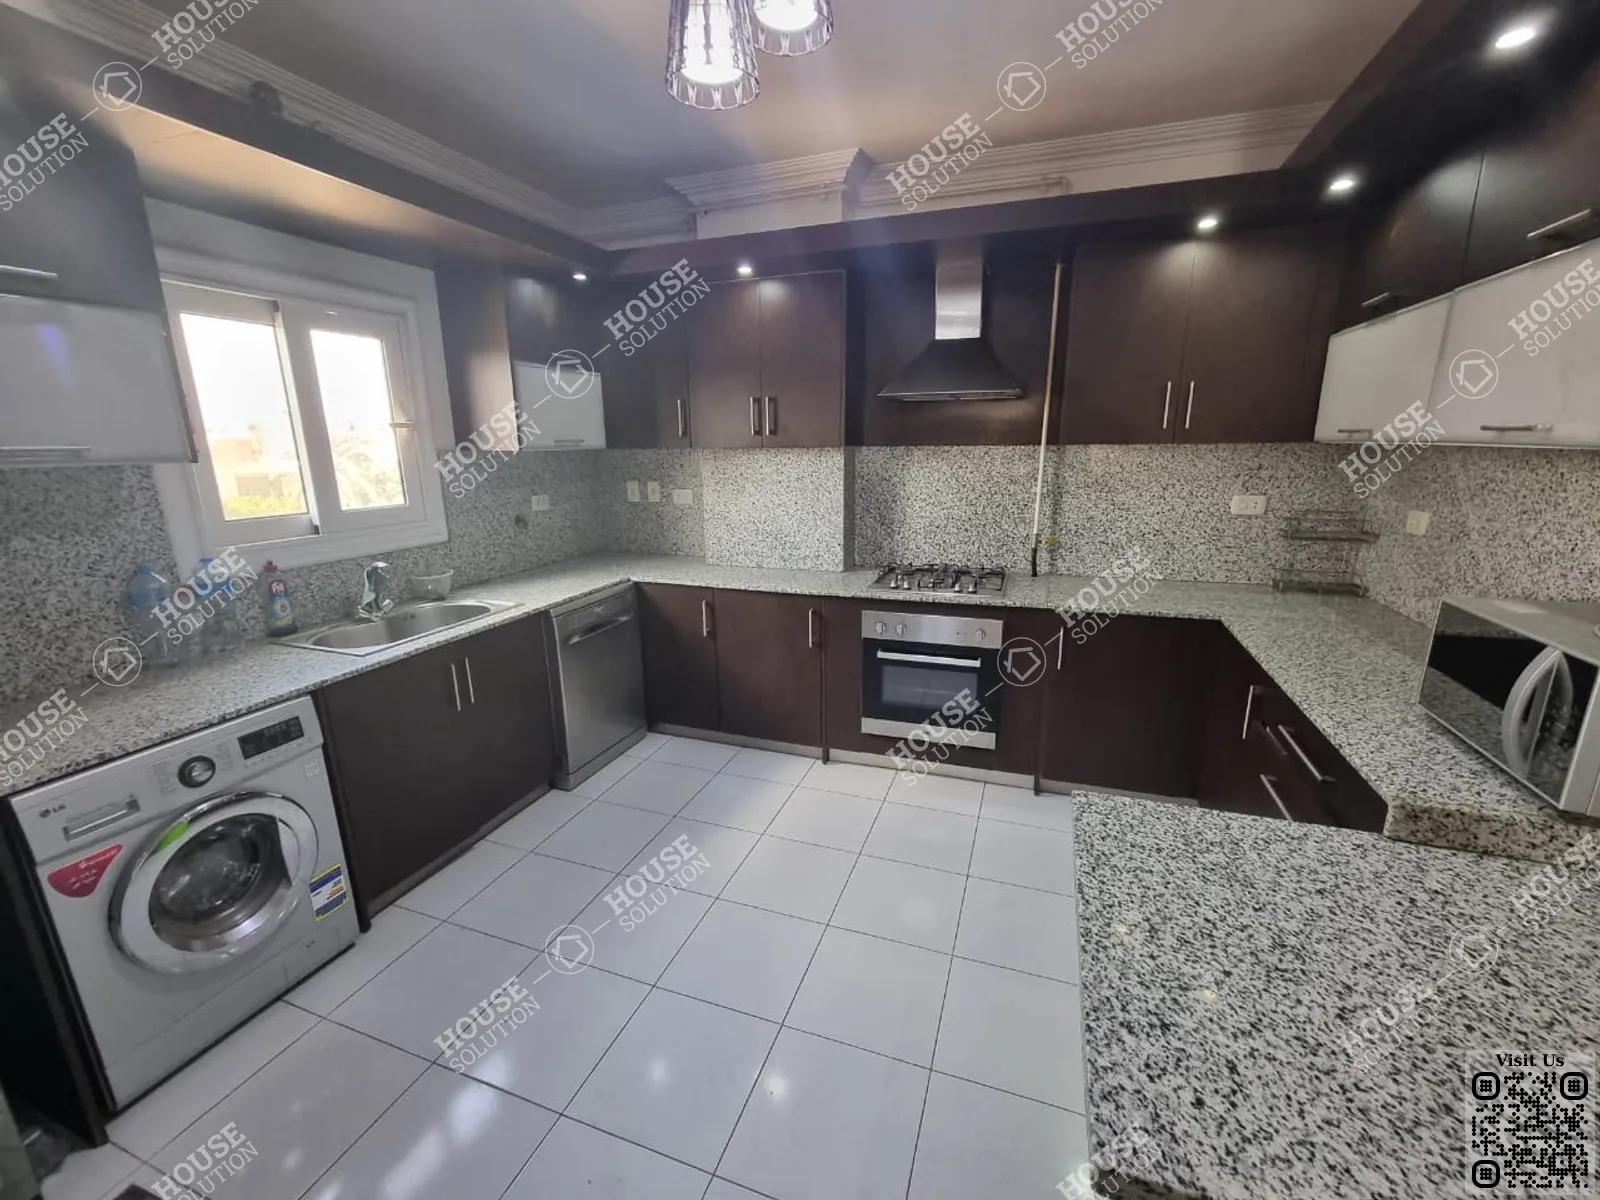 KITCHEN  @ Apartments For Rent In Maadi Maadi Sarayat Area: 220 m² consists of 3 Bedrooms 3 Bathrooms Furnished 5 stars #5101-1